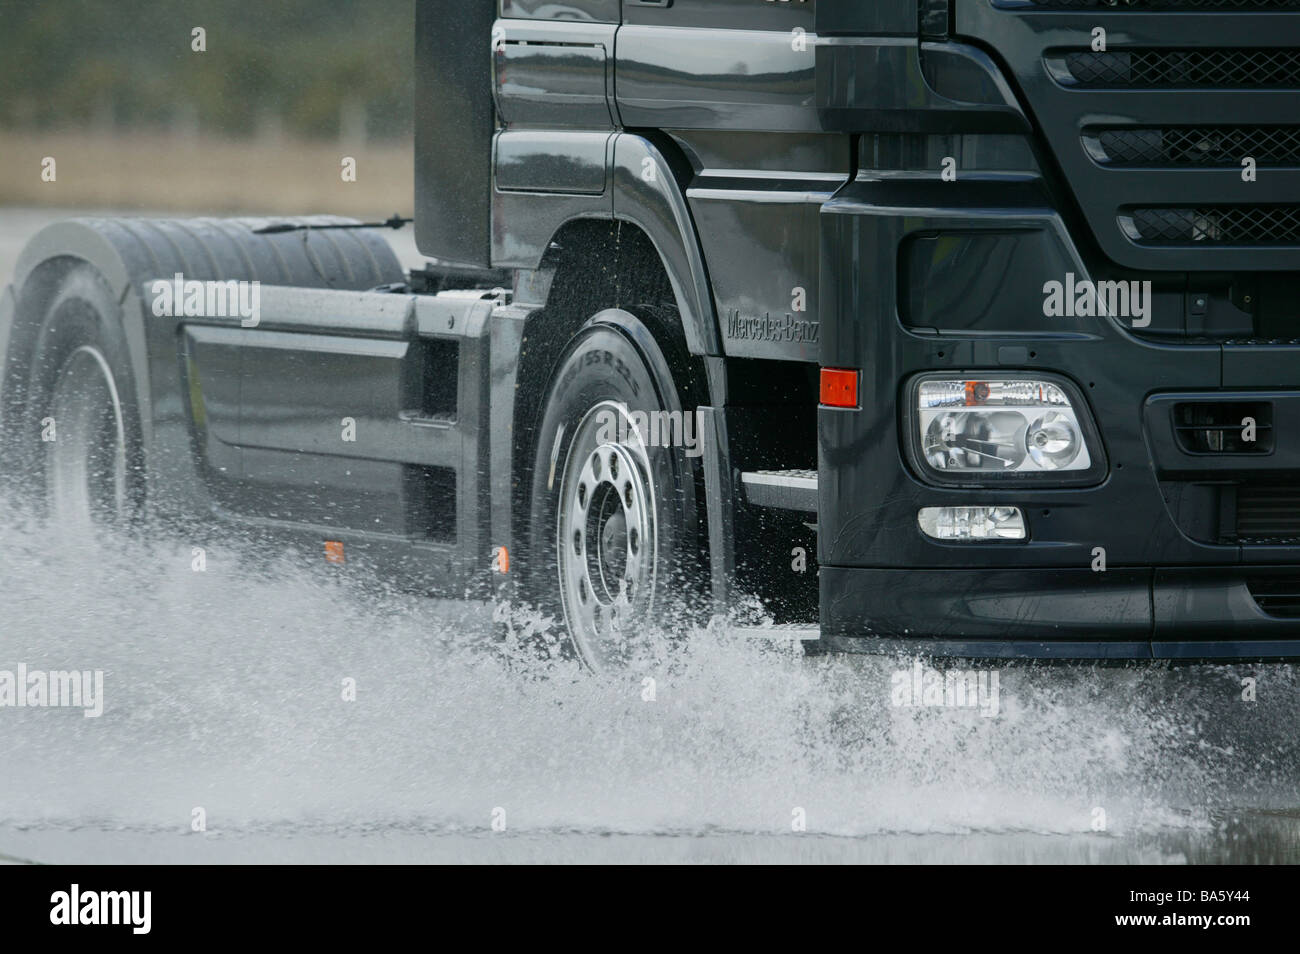 Aquaplaning-Gefahr drive test-route Mercedes-Lkw basins no property release courses test-courses water Aquaplaning simulation Stock Photo